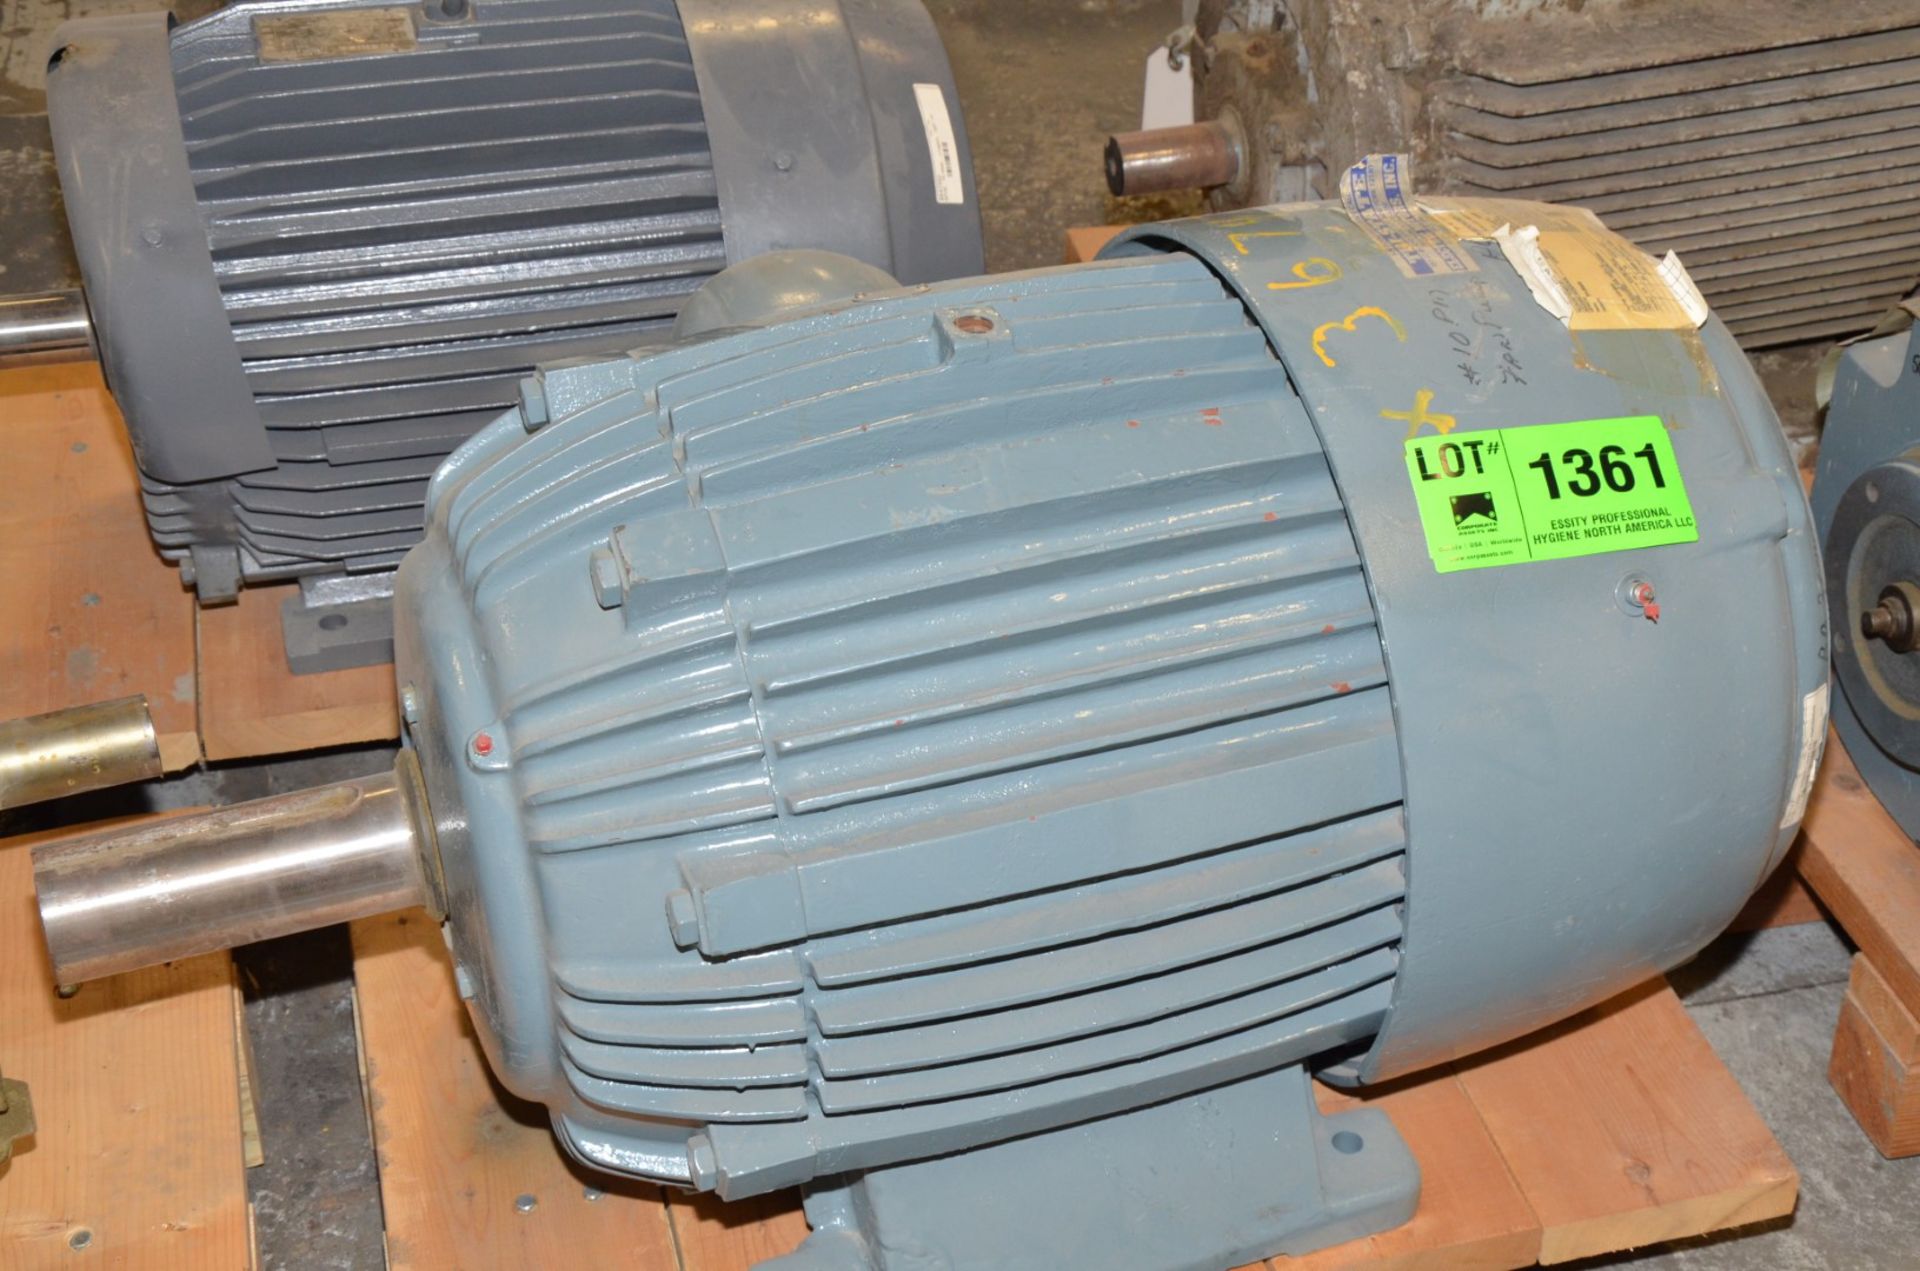 US ELECTRIC 75 HP 875 RPM 460V ELECTRIC MOTOR [RIGGING FEE FOR LOT #1361 - $25 USD PLUS APPLICABLE